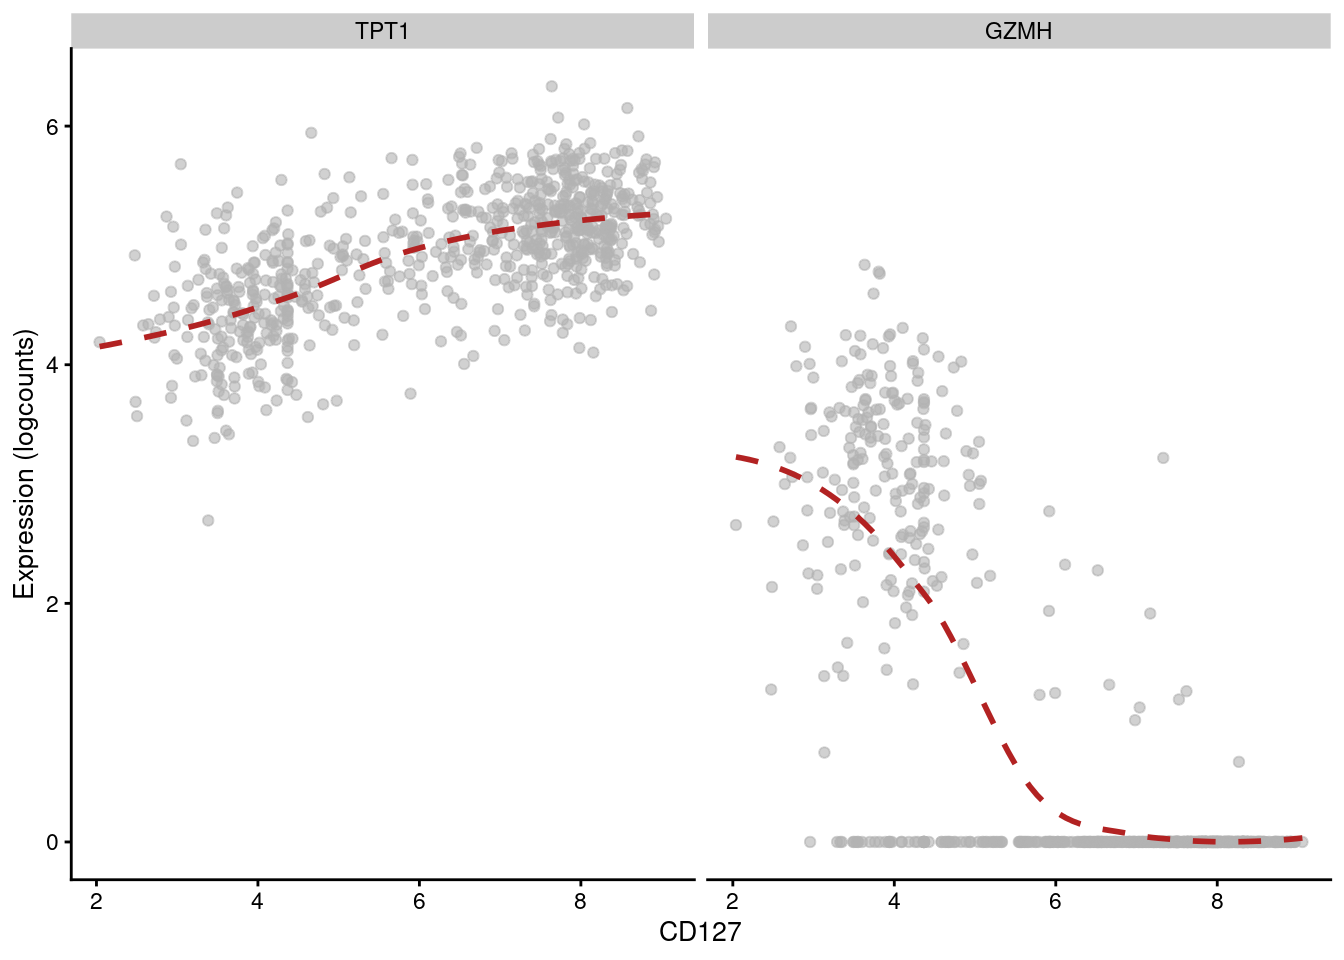 Expression of _GZMH_ and _TPT1_ with respect to CD127 abundance in each cell of cluster 3 in the PBMC dataset.